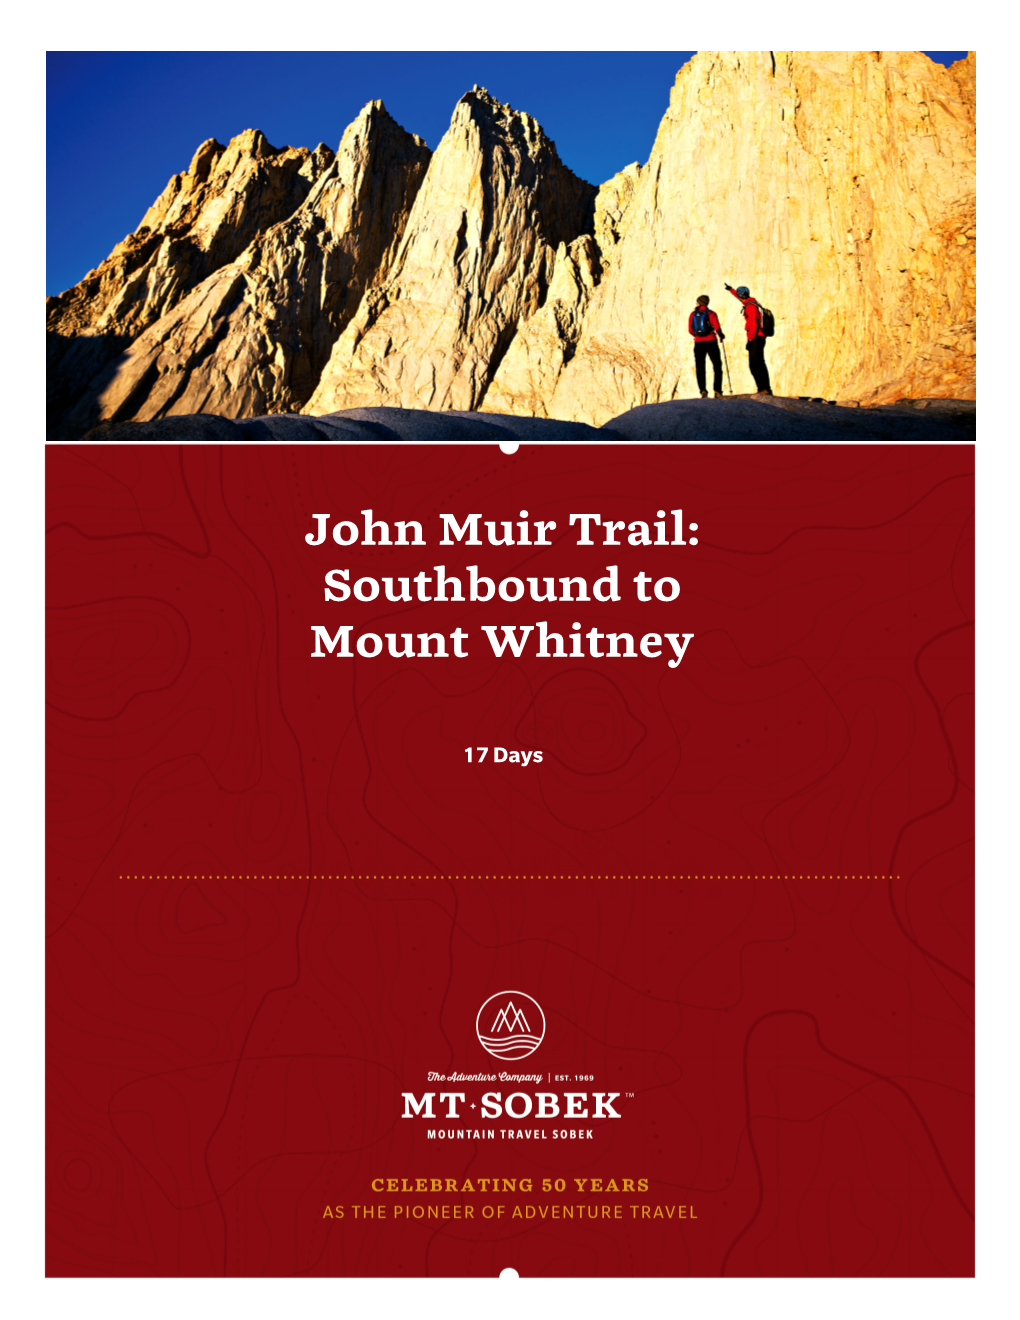 John Muir Trail: Southbound to Mount Whitney